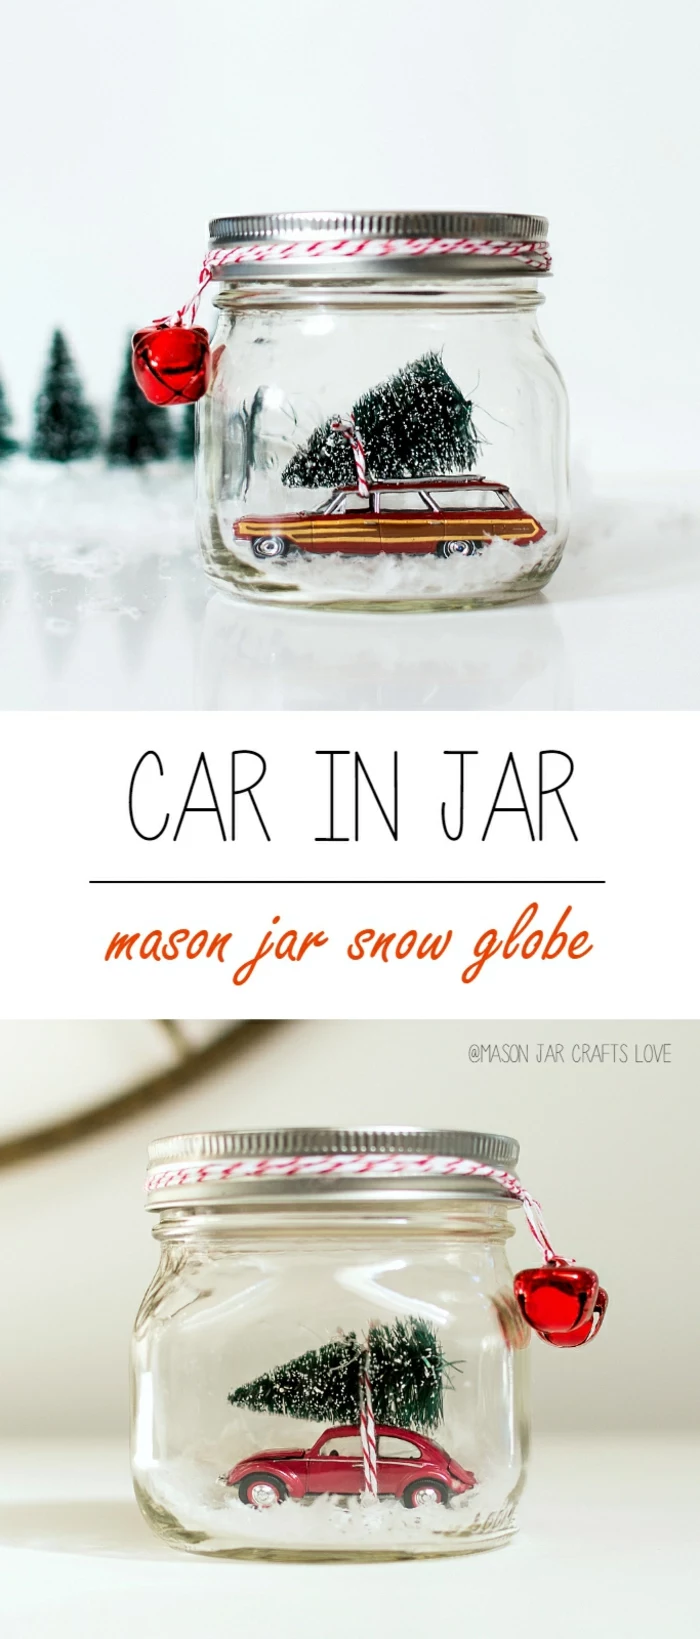 diy gift ideas, two jars filled with fake snow and red retro car toys, with Christmas trees tied to the cars, red and white string tied around the jar lids, small red bells